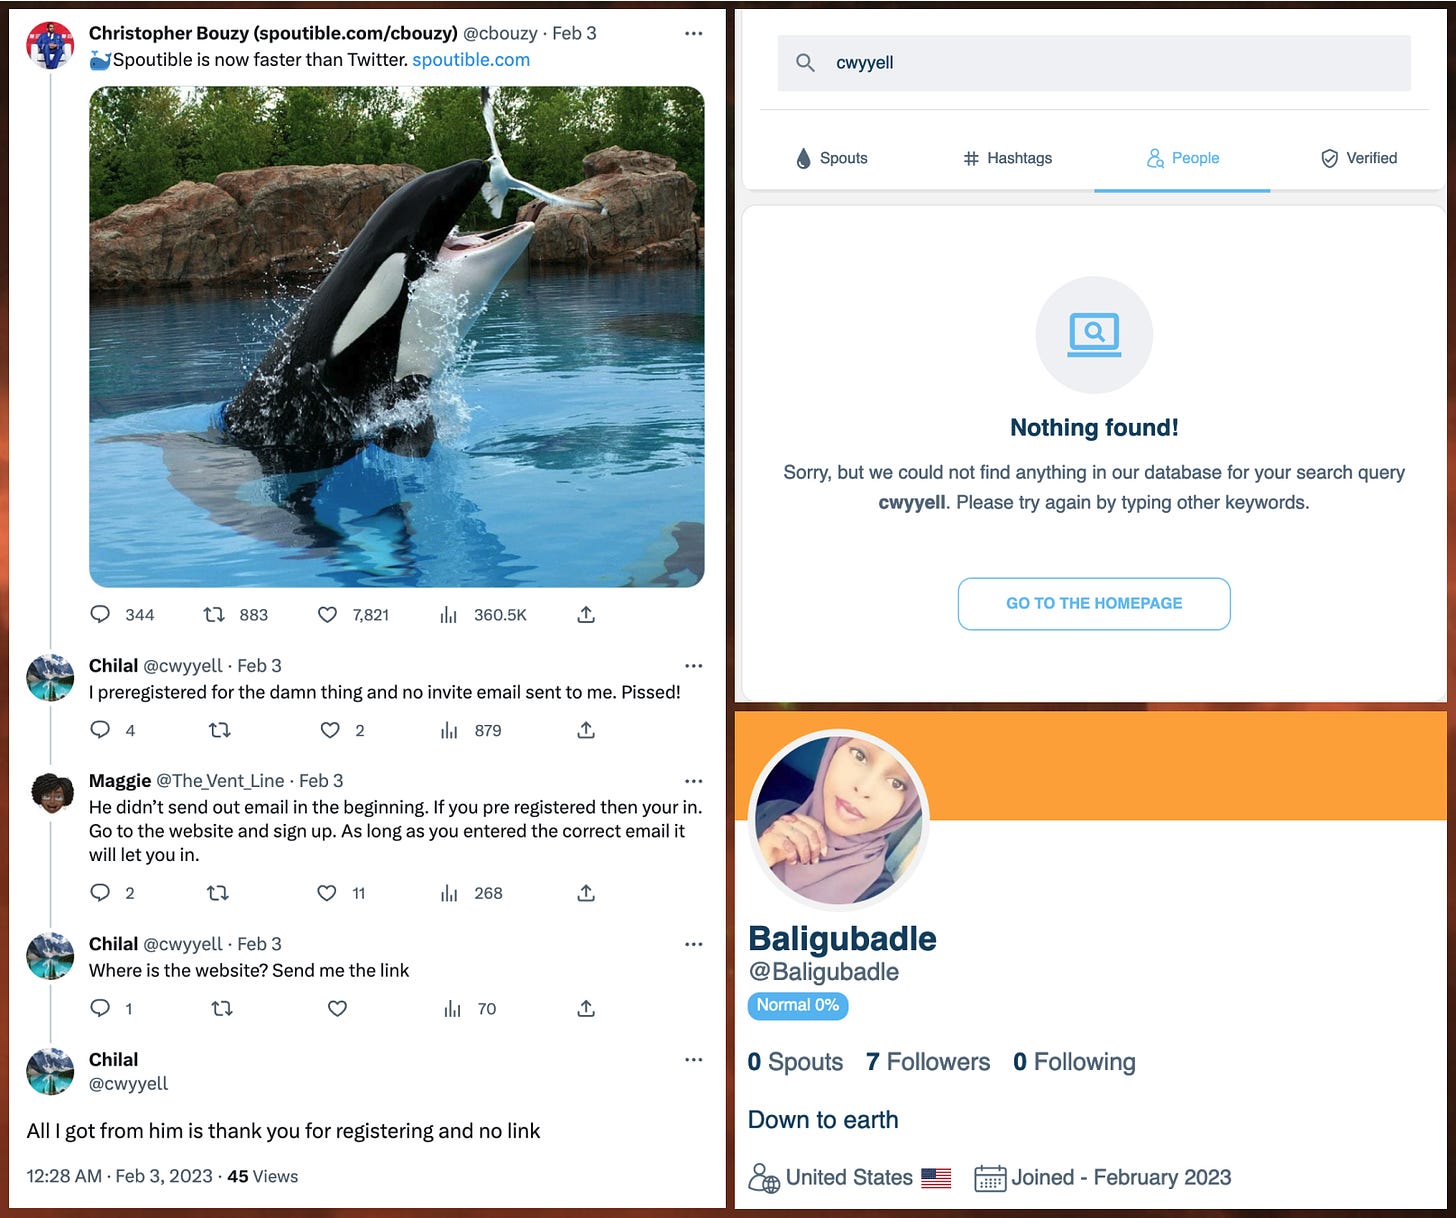 screenshots of @cwyyell tweeting about registering for a spoutible account, search showing no cwyyell account on spoutible, and screenshot of baligubadle account on spoutible